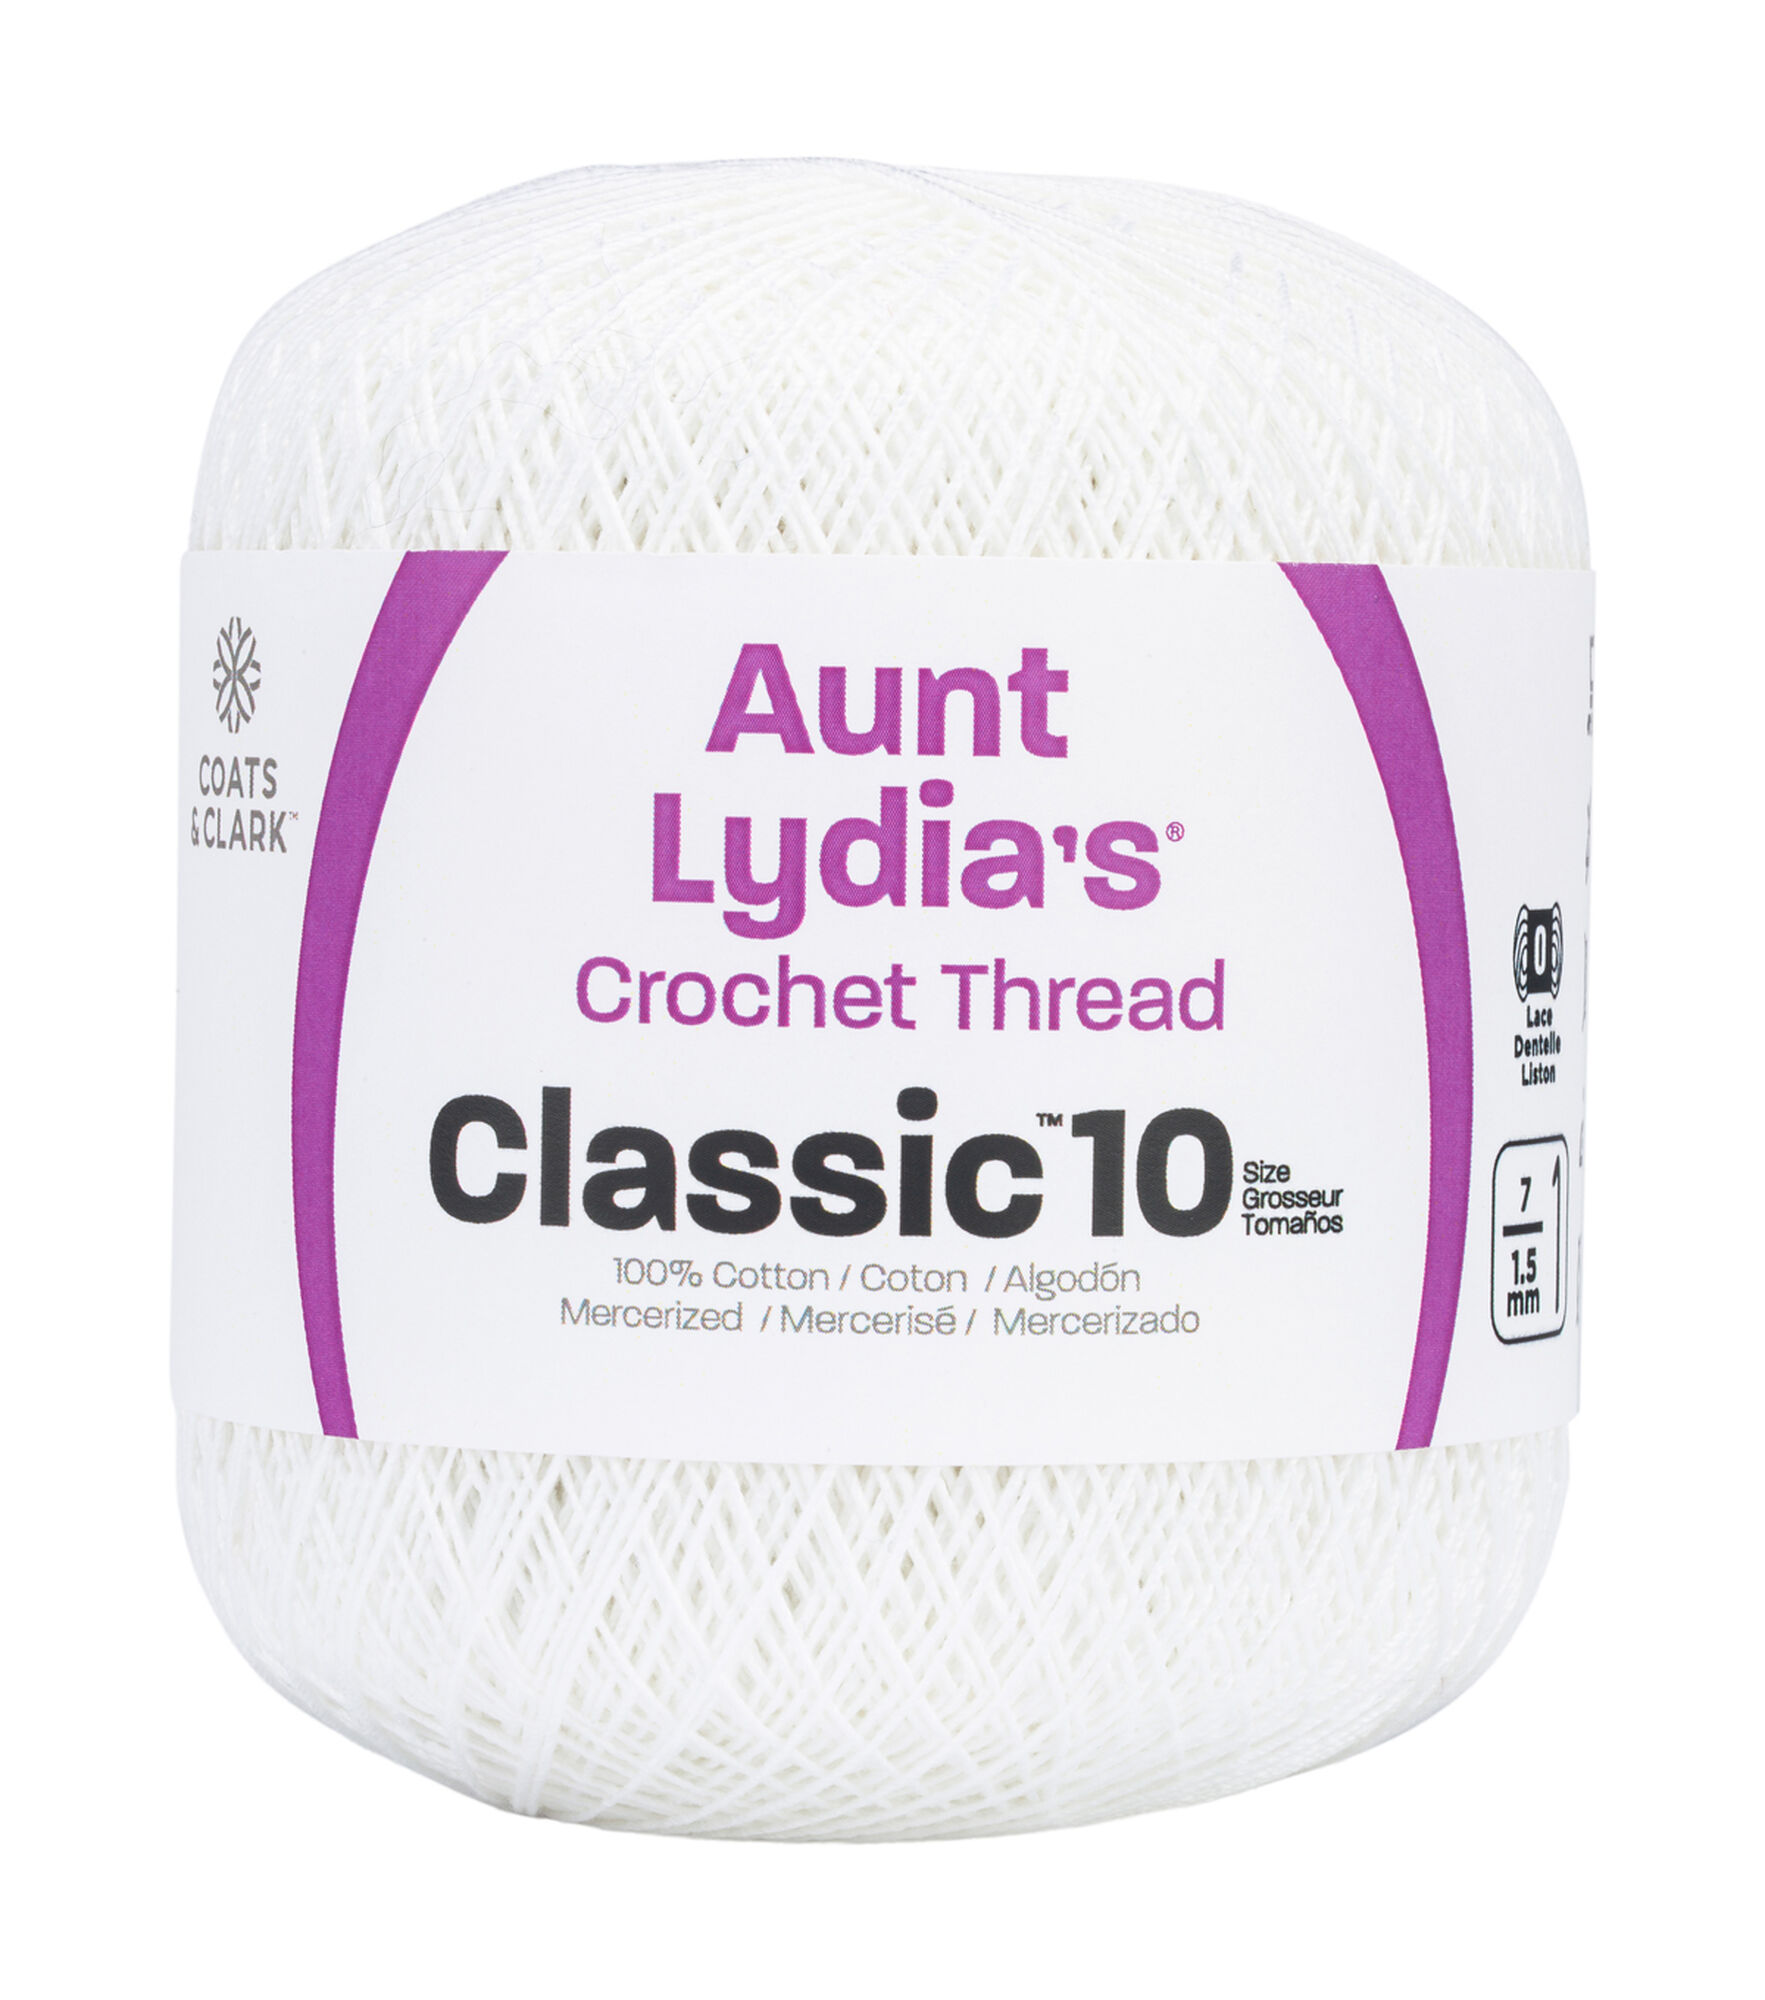 Aunt Lydia's Crochet Thread - Size 10 - Cardinal Red (2-Pack)